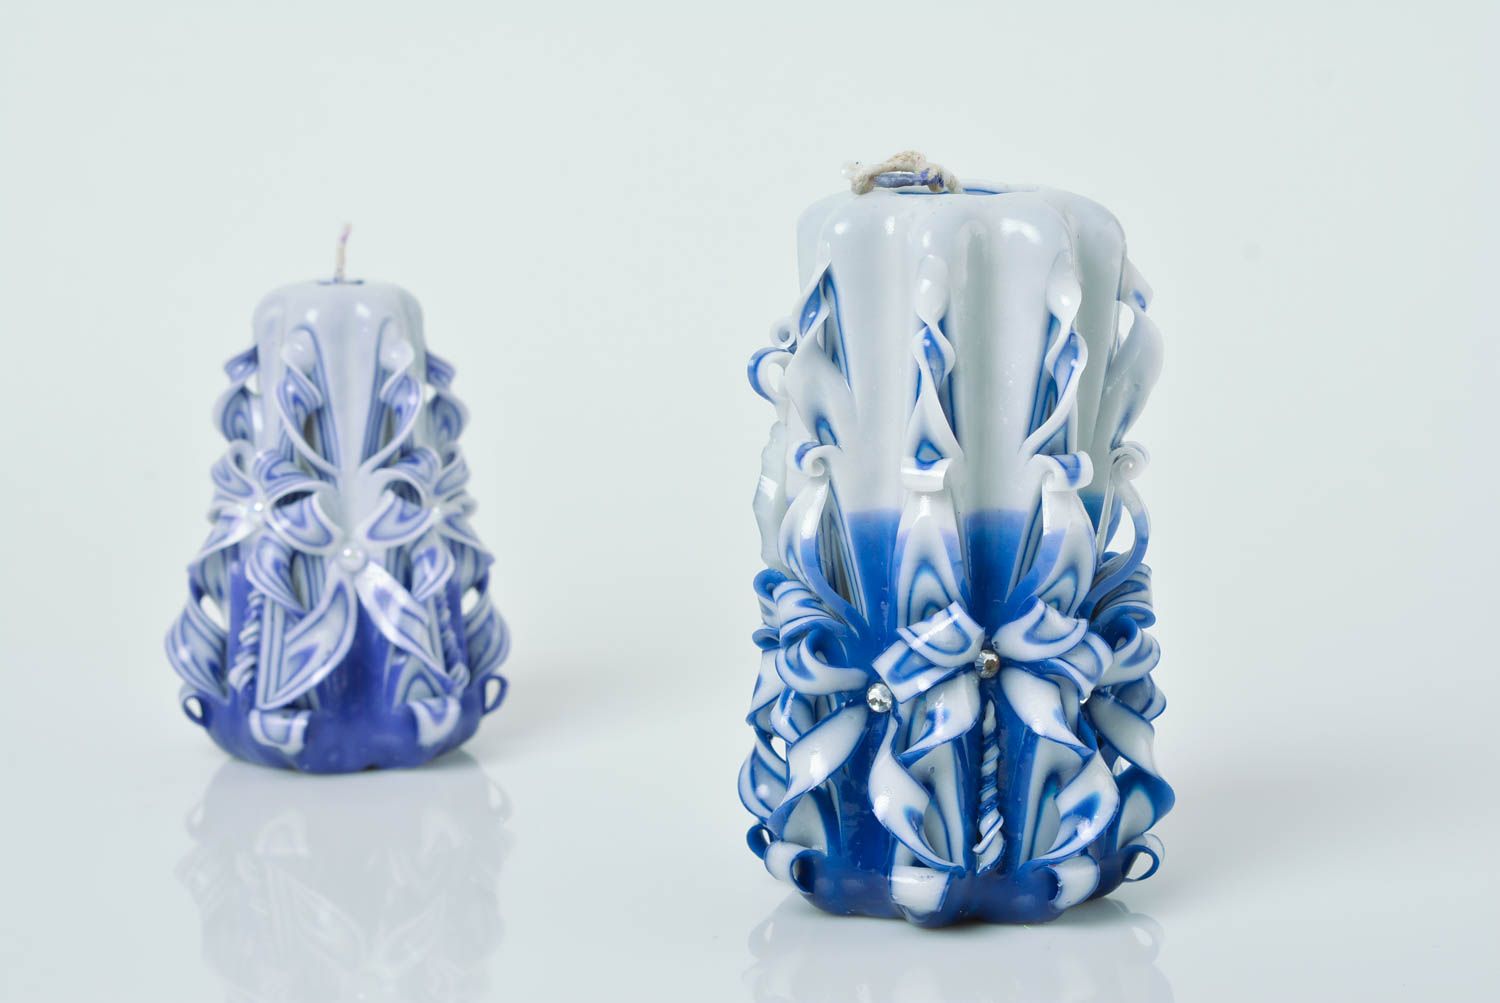 White and blue homemade designer paraffin candle beautiful decoration photo 5